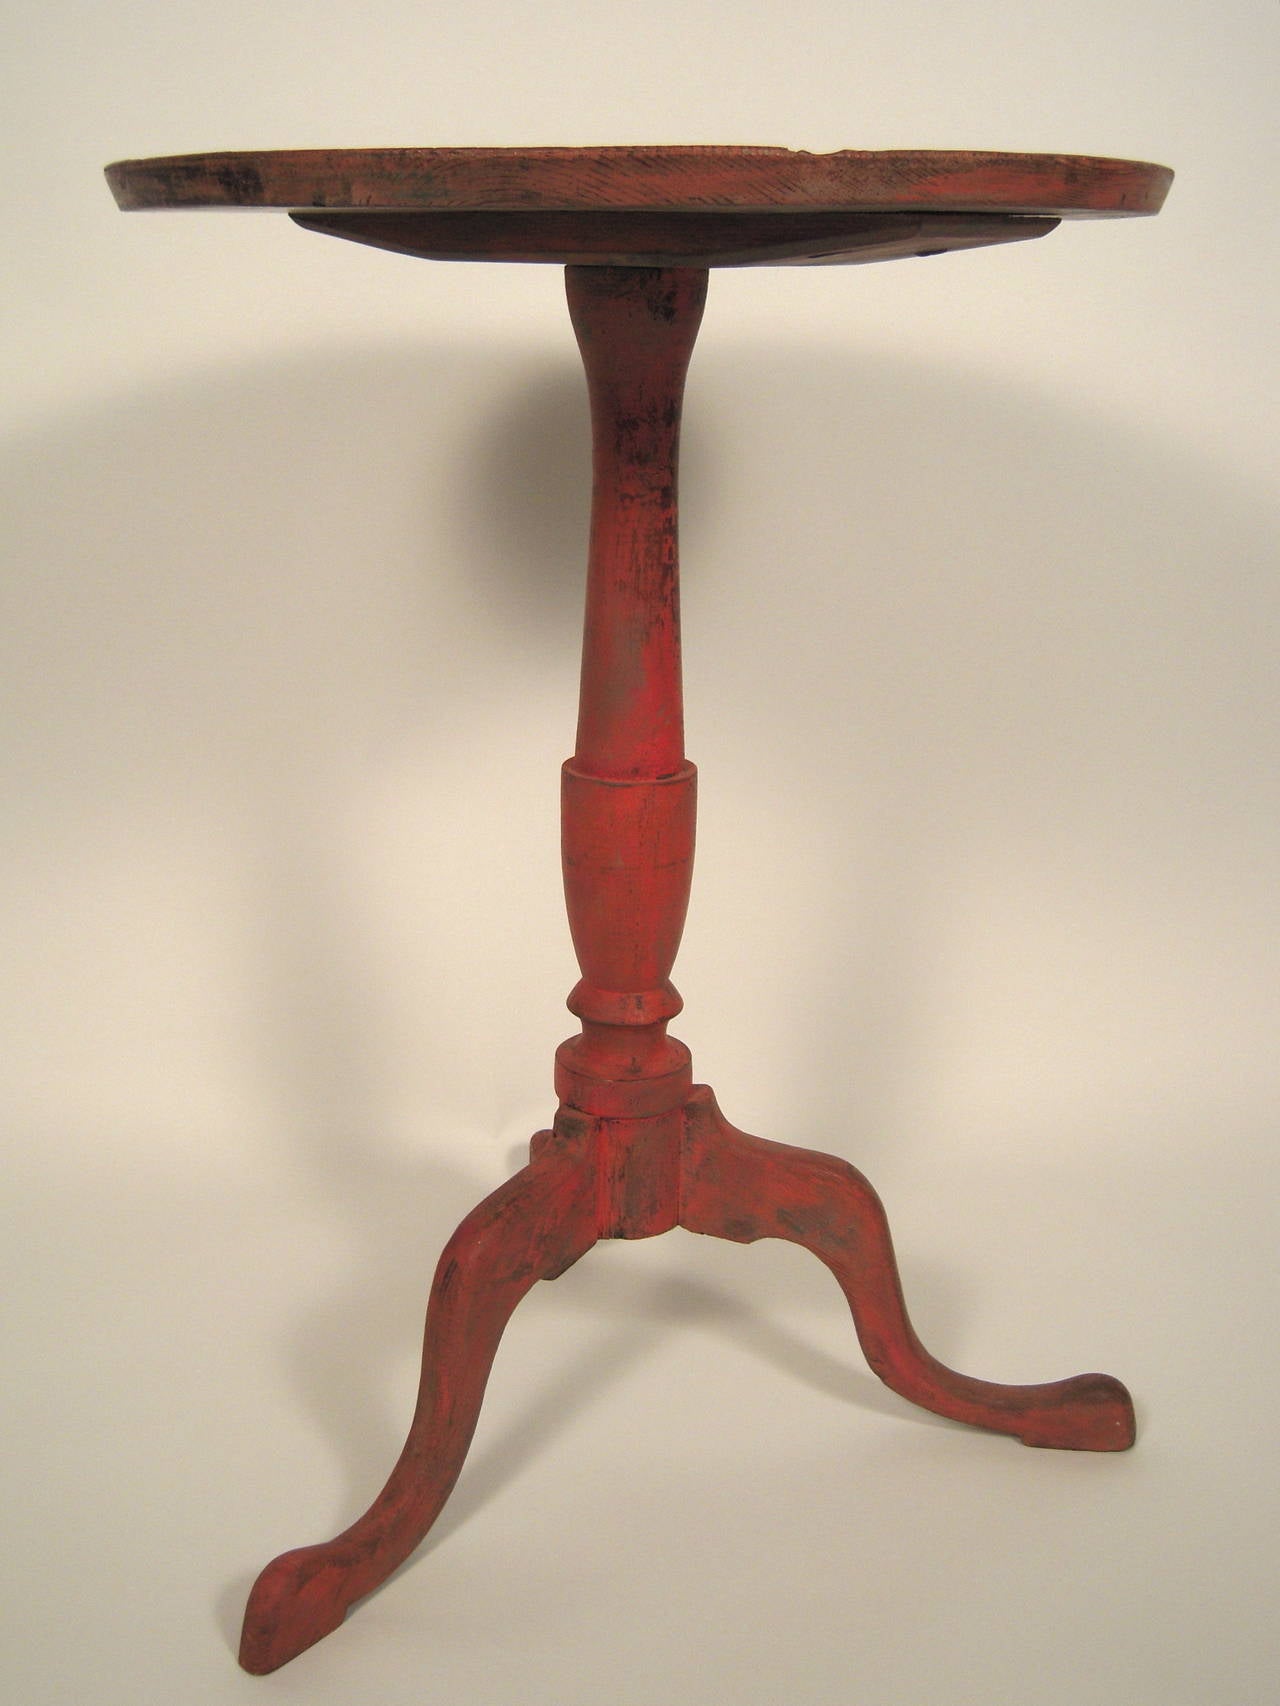 18th Century and Earlier Beautifully Colored Salmon Painted Federal Period Candle Stand, circa 1790